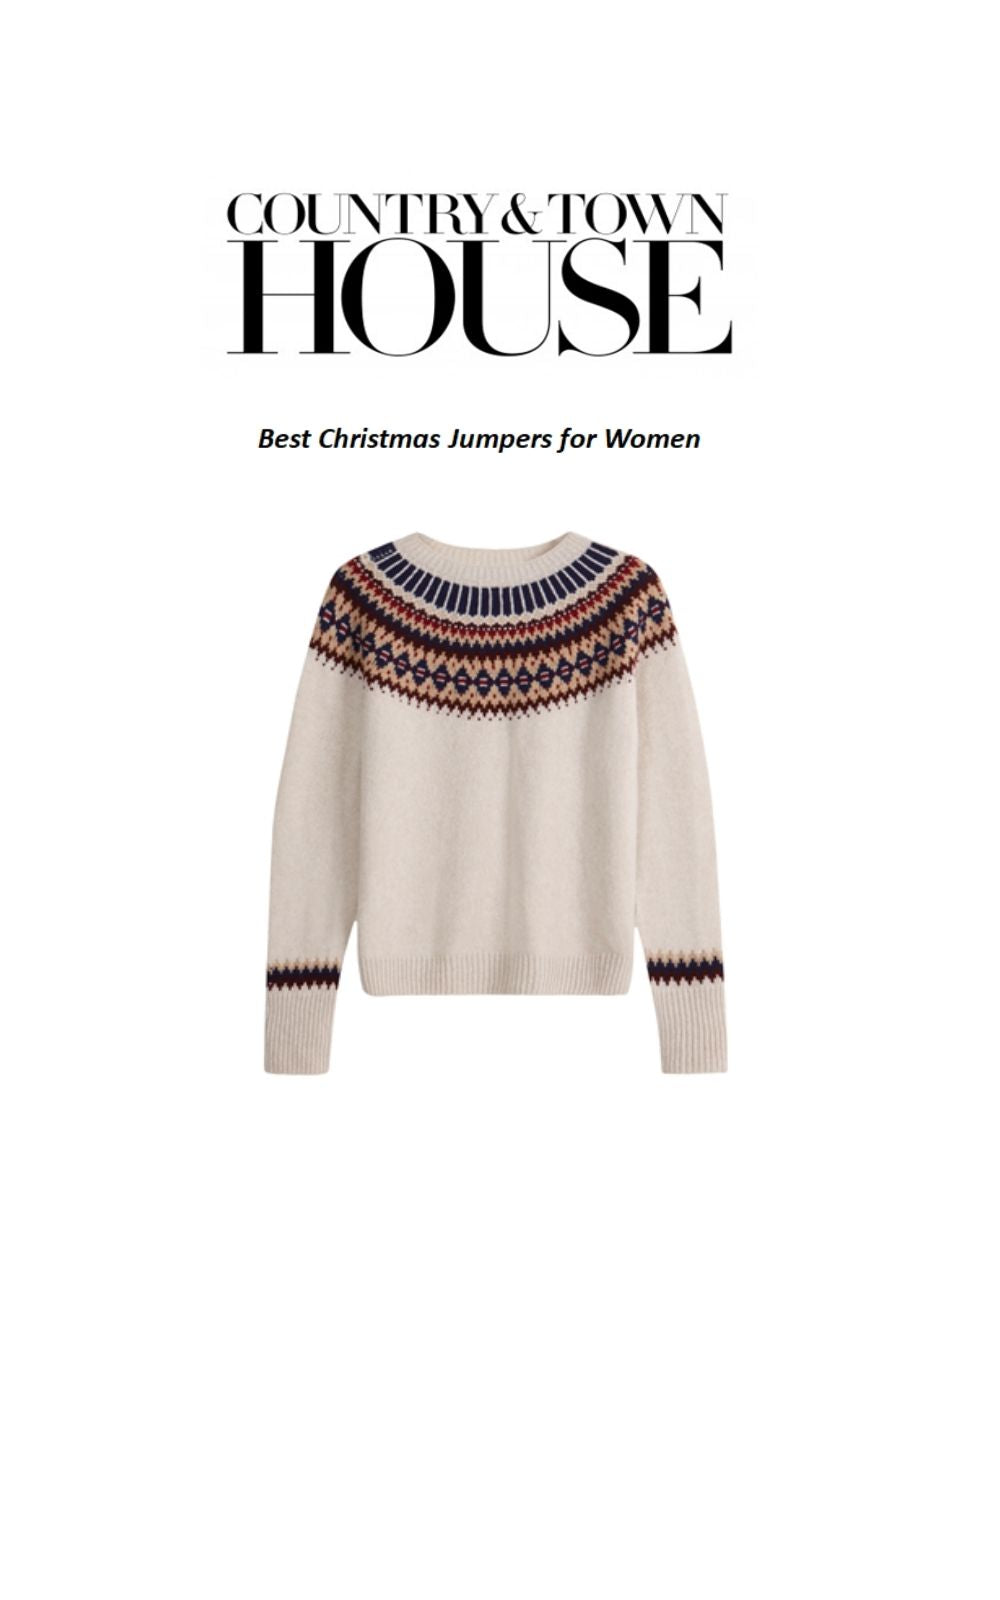 Country & Town House - November 20